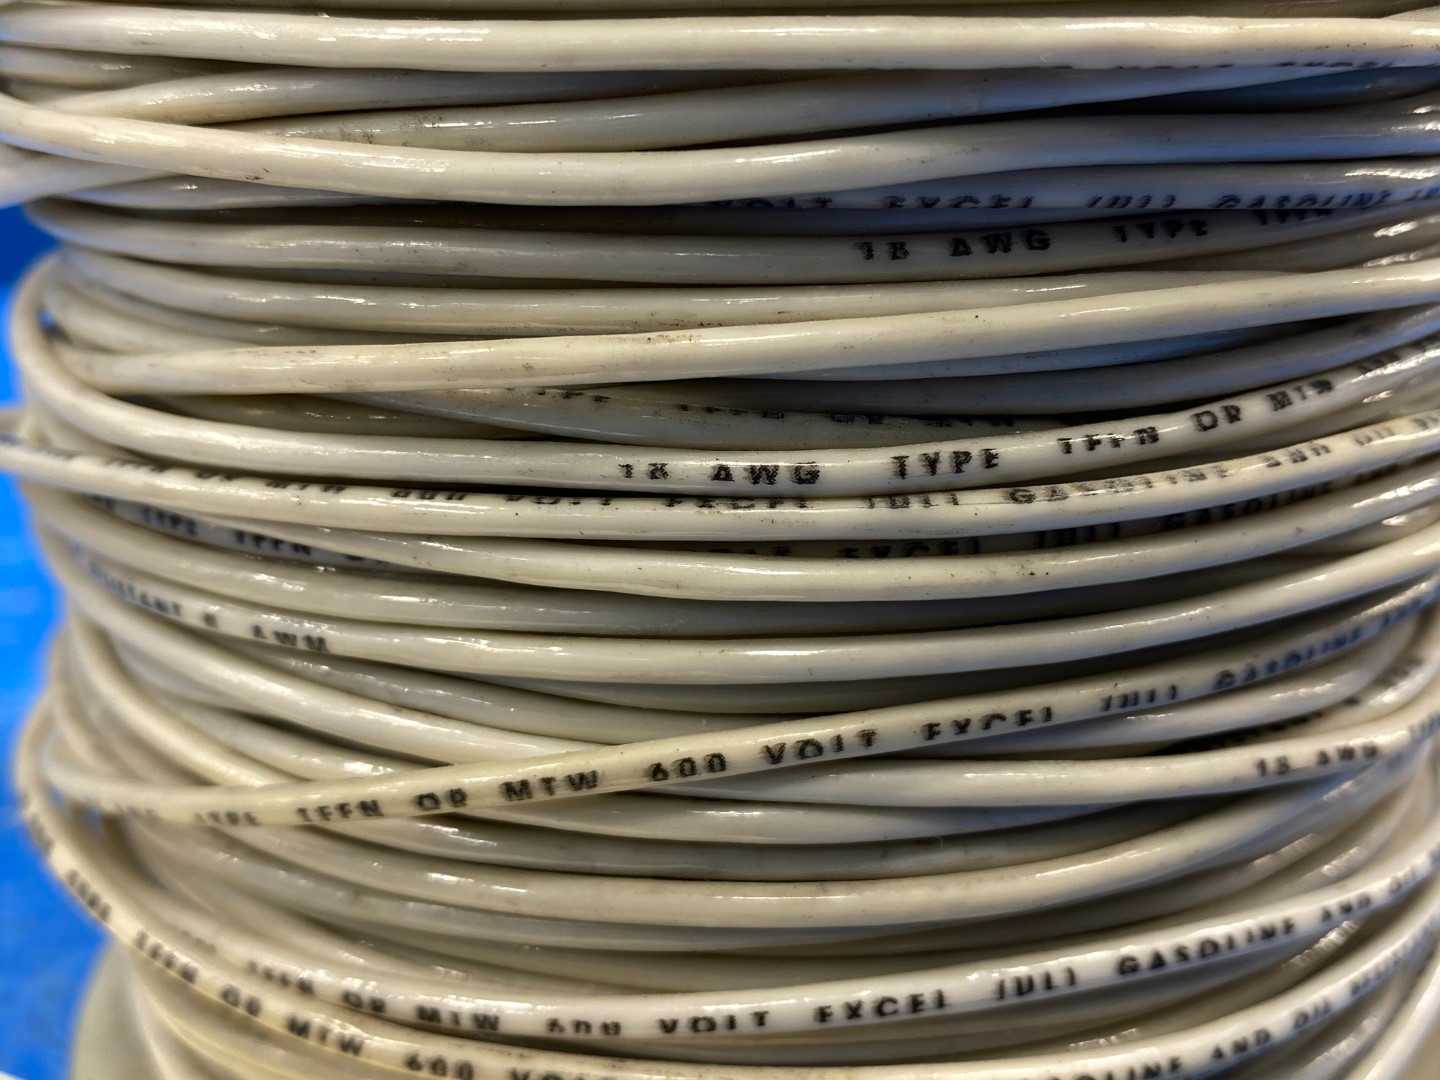 18 AWG White Copper Wire Type TFFN 450FT